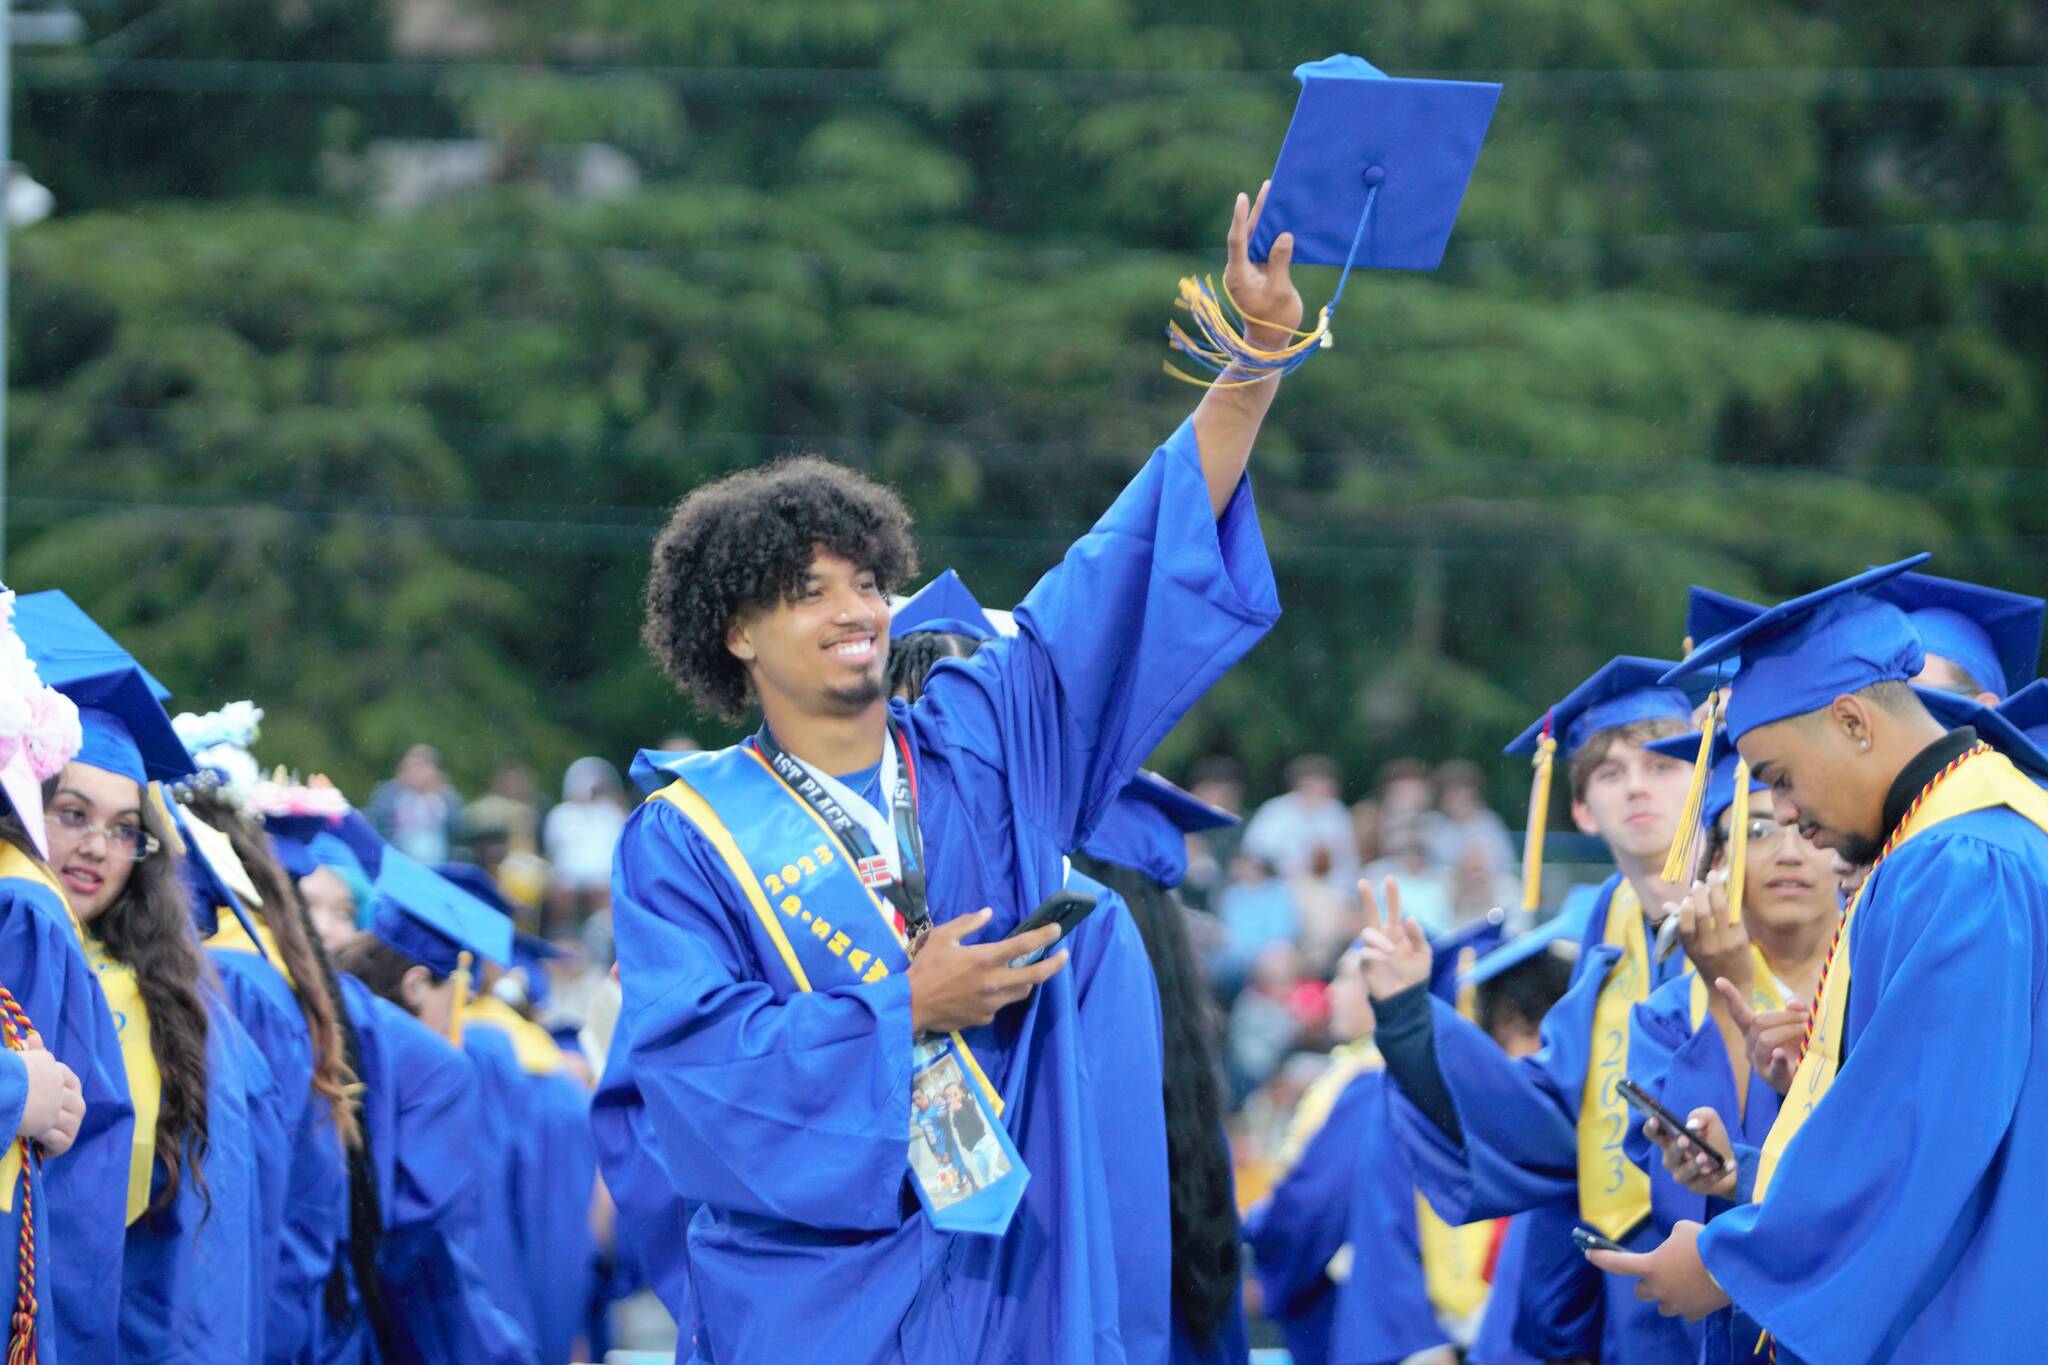 A Bremerton graduate finds a familiar face in the crowd, doing so with a little help from his phone. Elisha Meyer/Kitsap News Group Photos